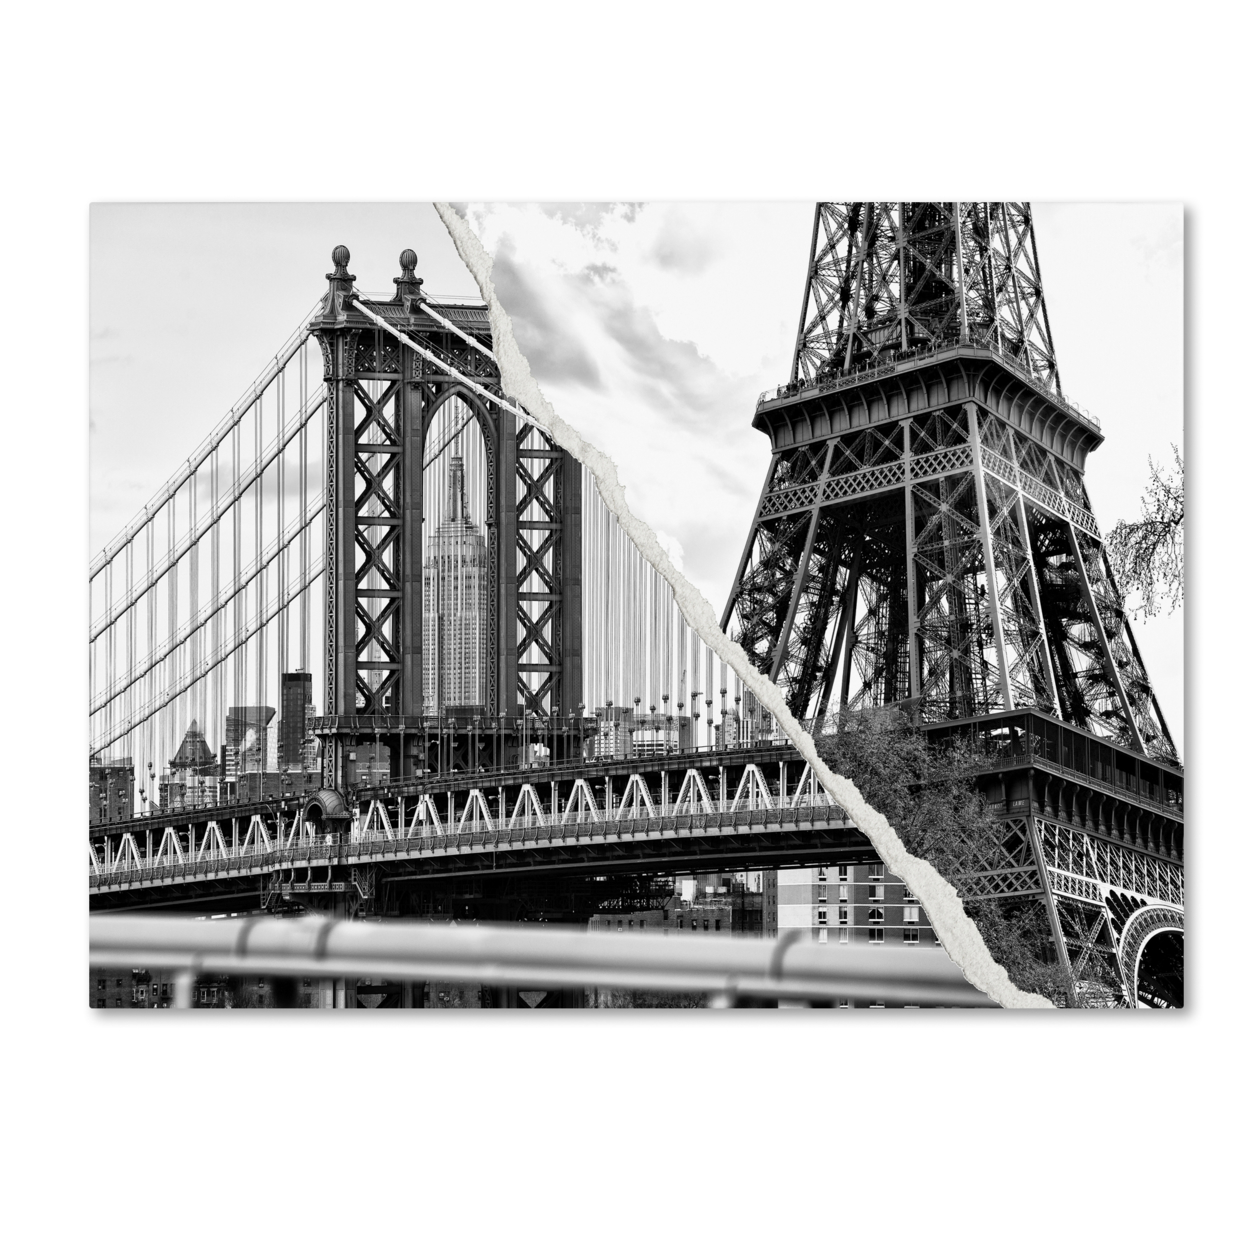 Philippe Hugonnard 'The Tower And The Bridge' Canvas Art 18 X 24